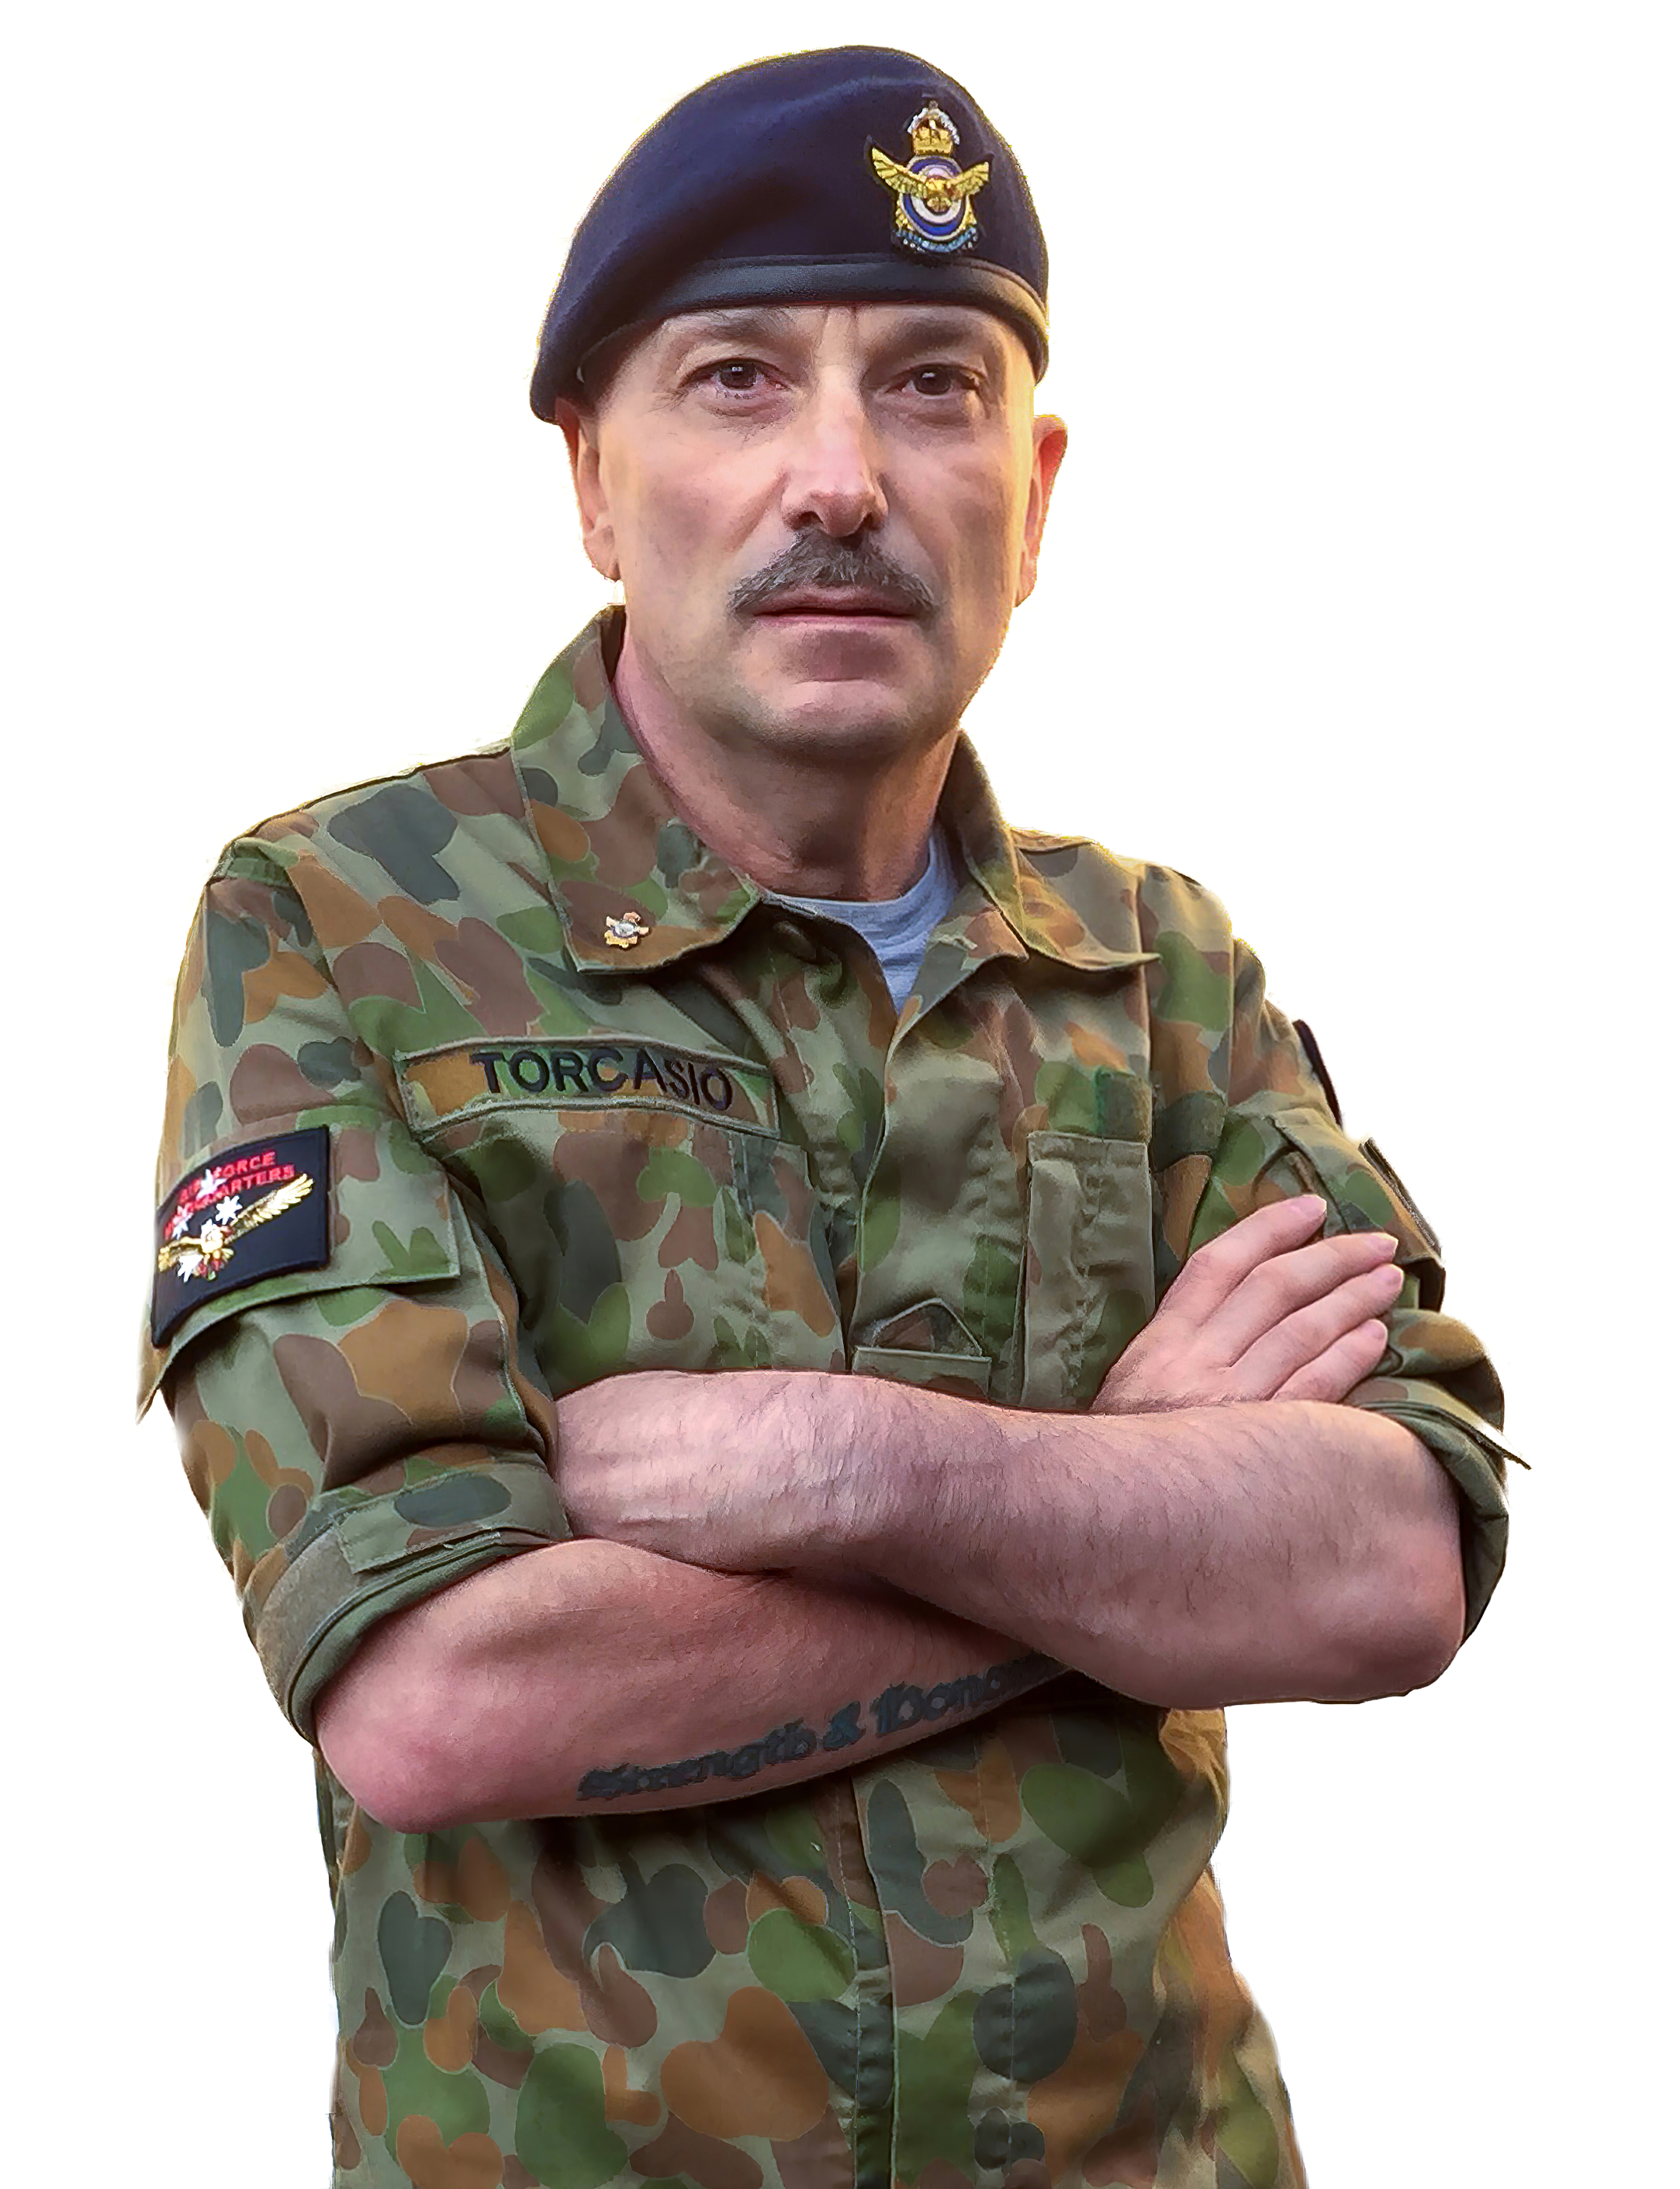 Soldier : Wearing Disruptive Pattern Camouflage Uniform and Beret Royal Australian Air Force , Soldier : Wearing Disruptive Pattern Camouflage Uniform and Beret Royal Australian Air Force 